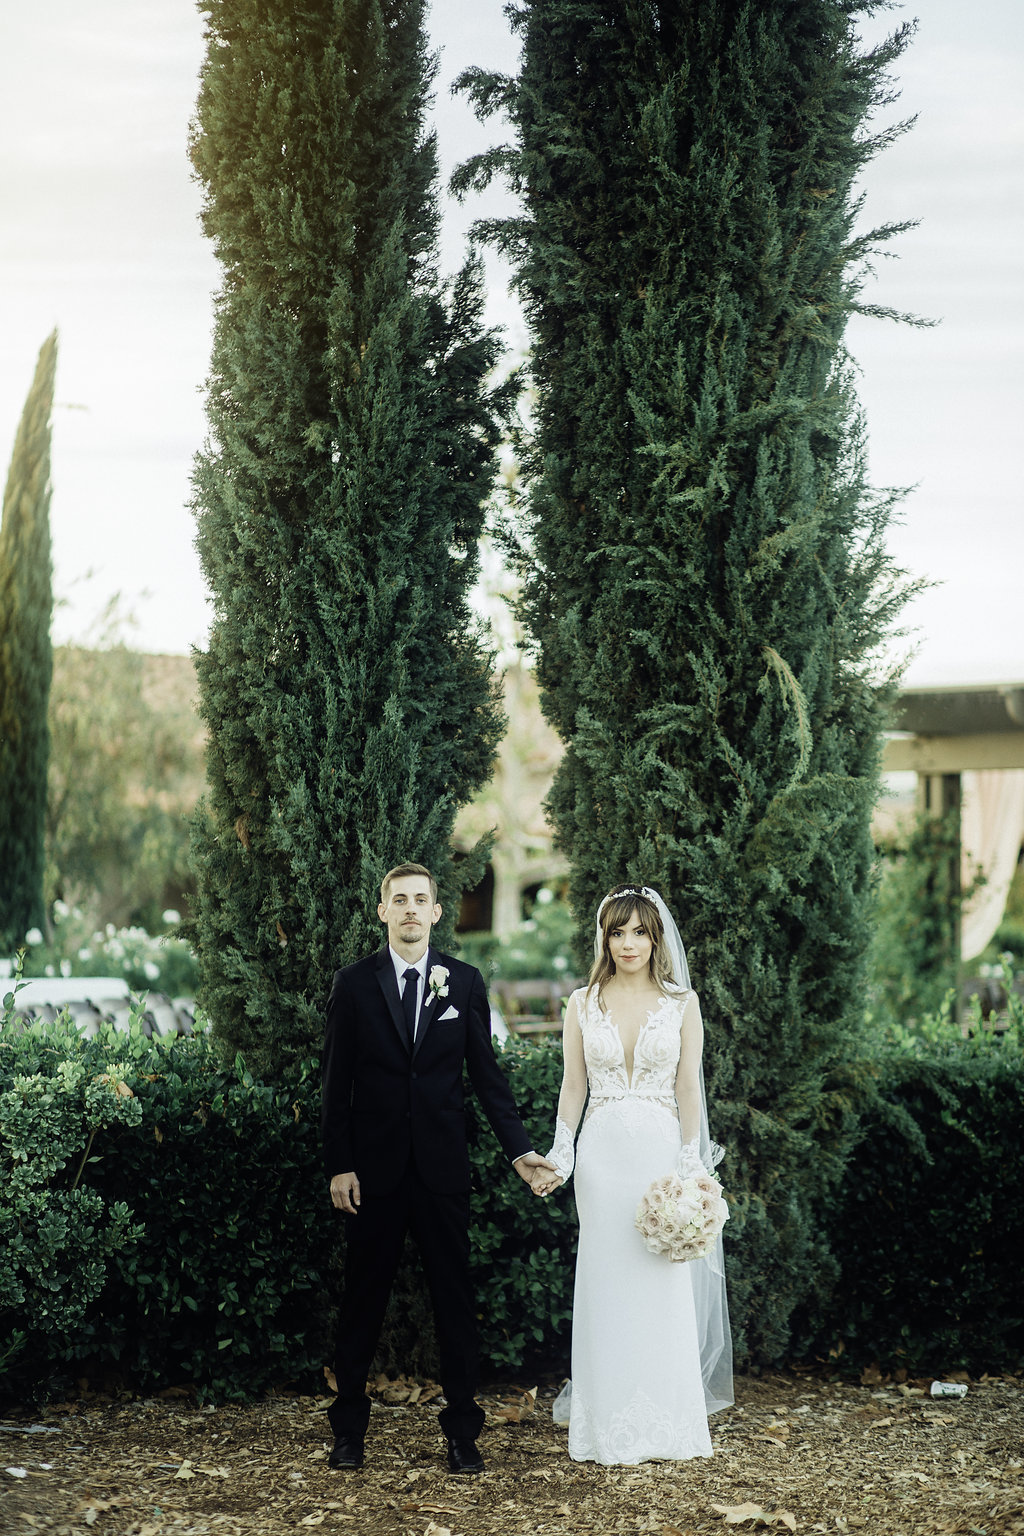 Wedding Photograph Of Bride And Groom Holding Hands In The Garden Los Angeles